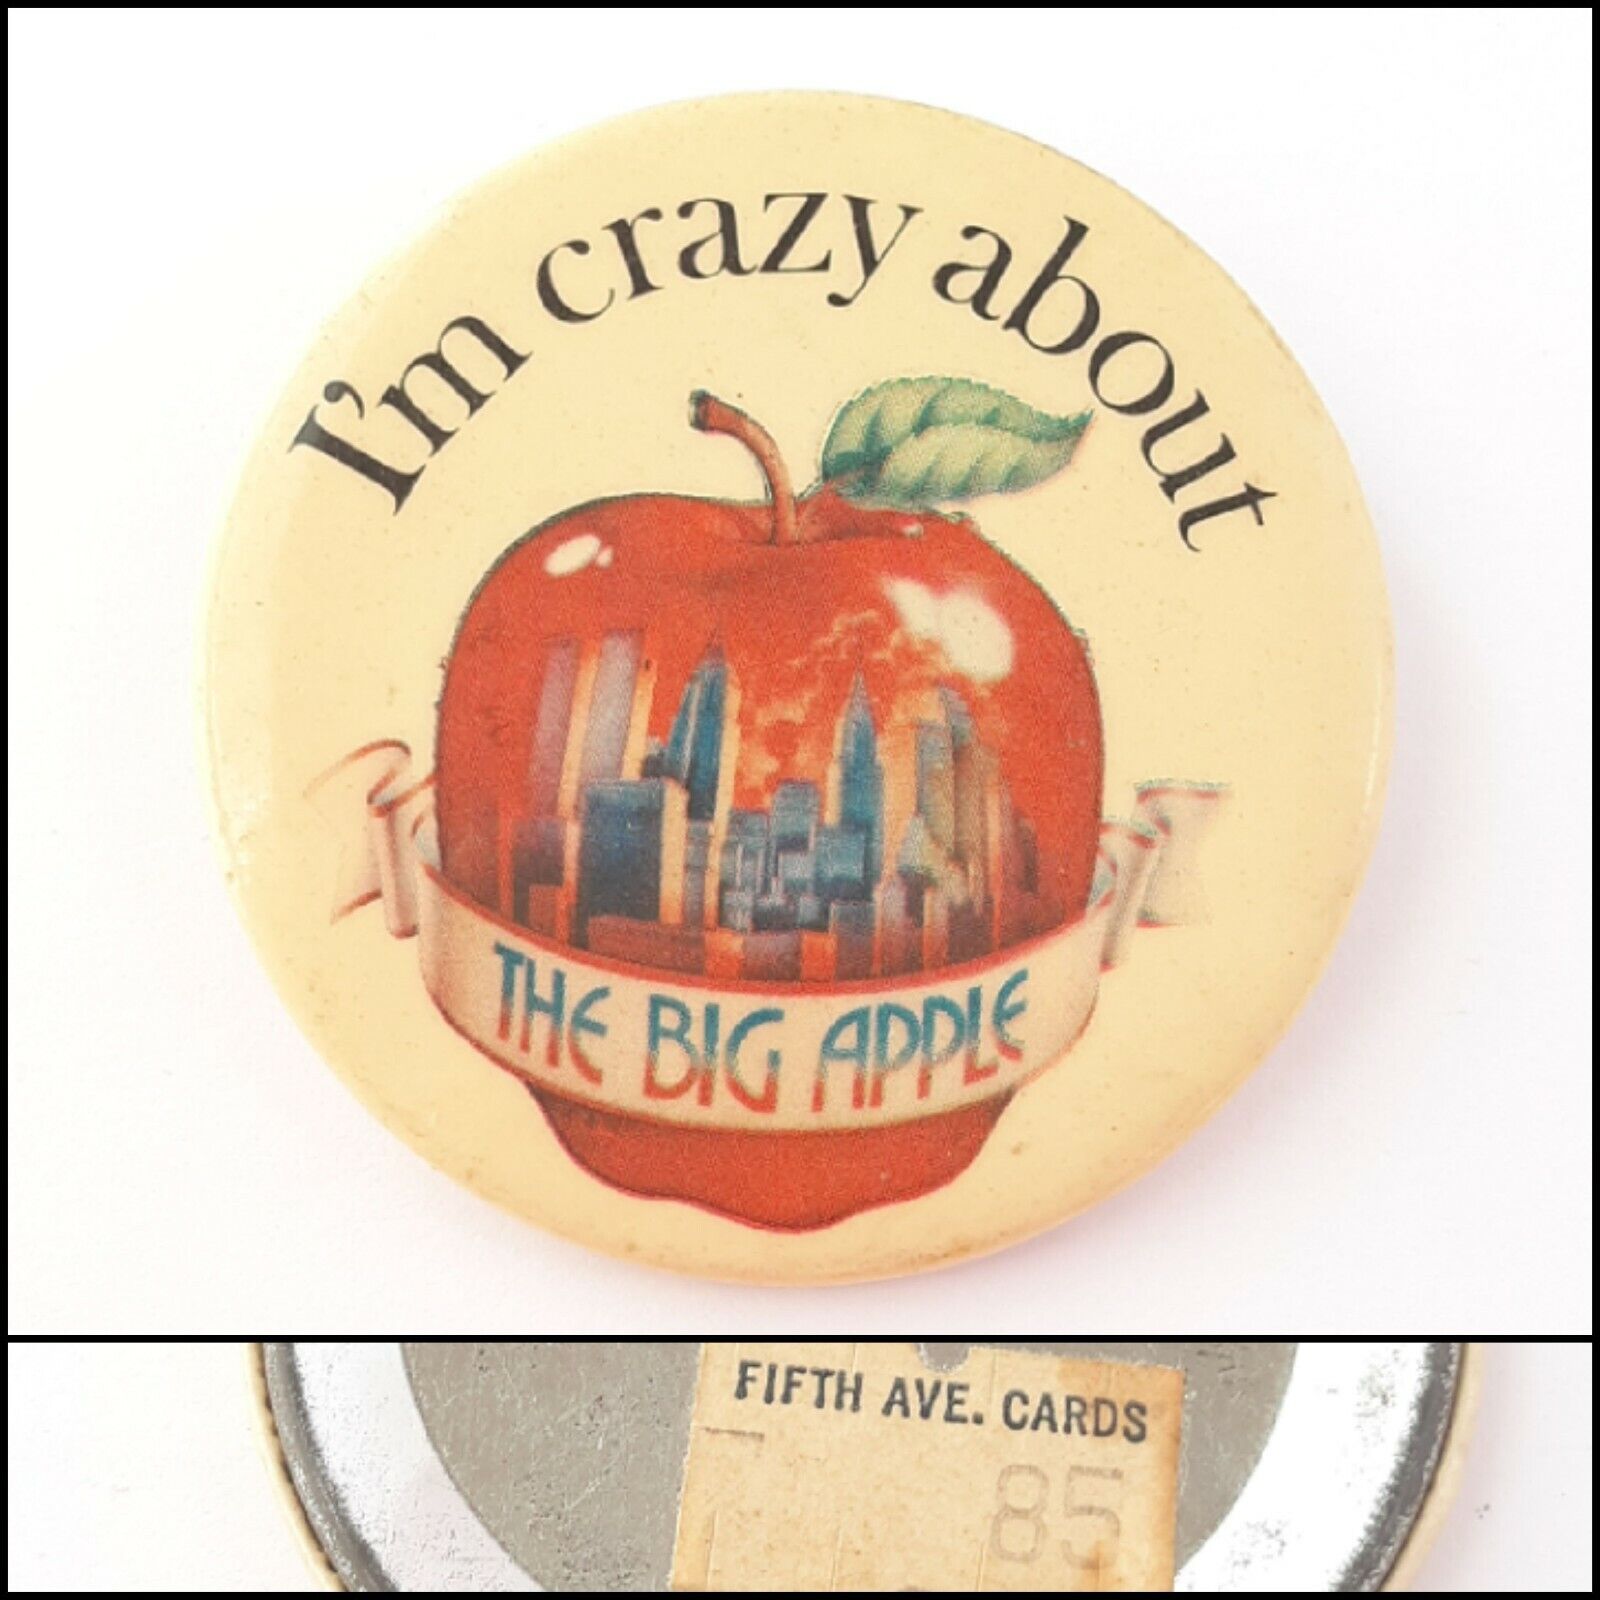 Vintage I\'m Crazy About the Big Apple W/ 5th Ave Cards Tag Button Pin